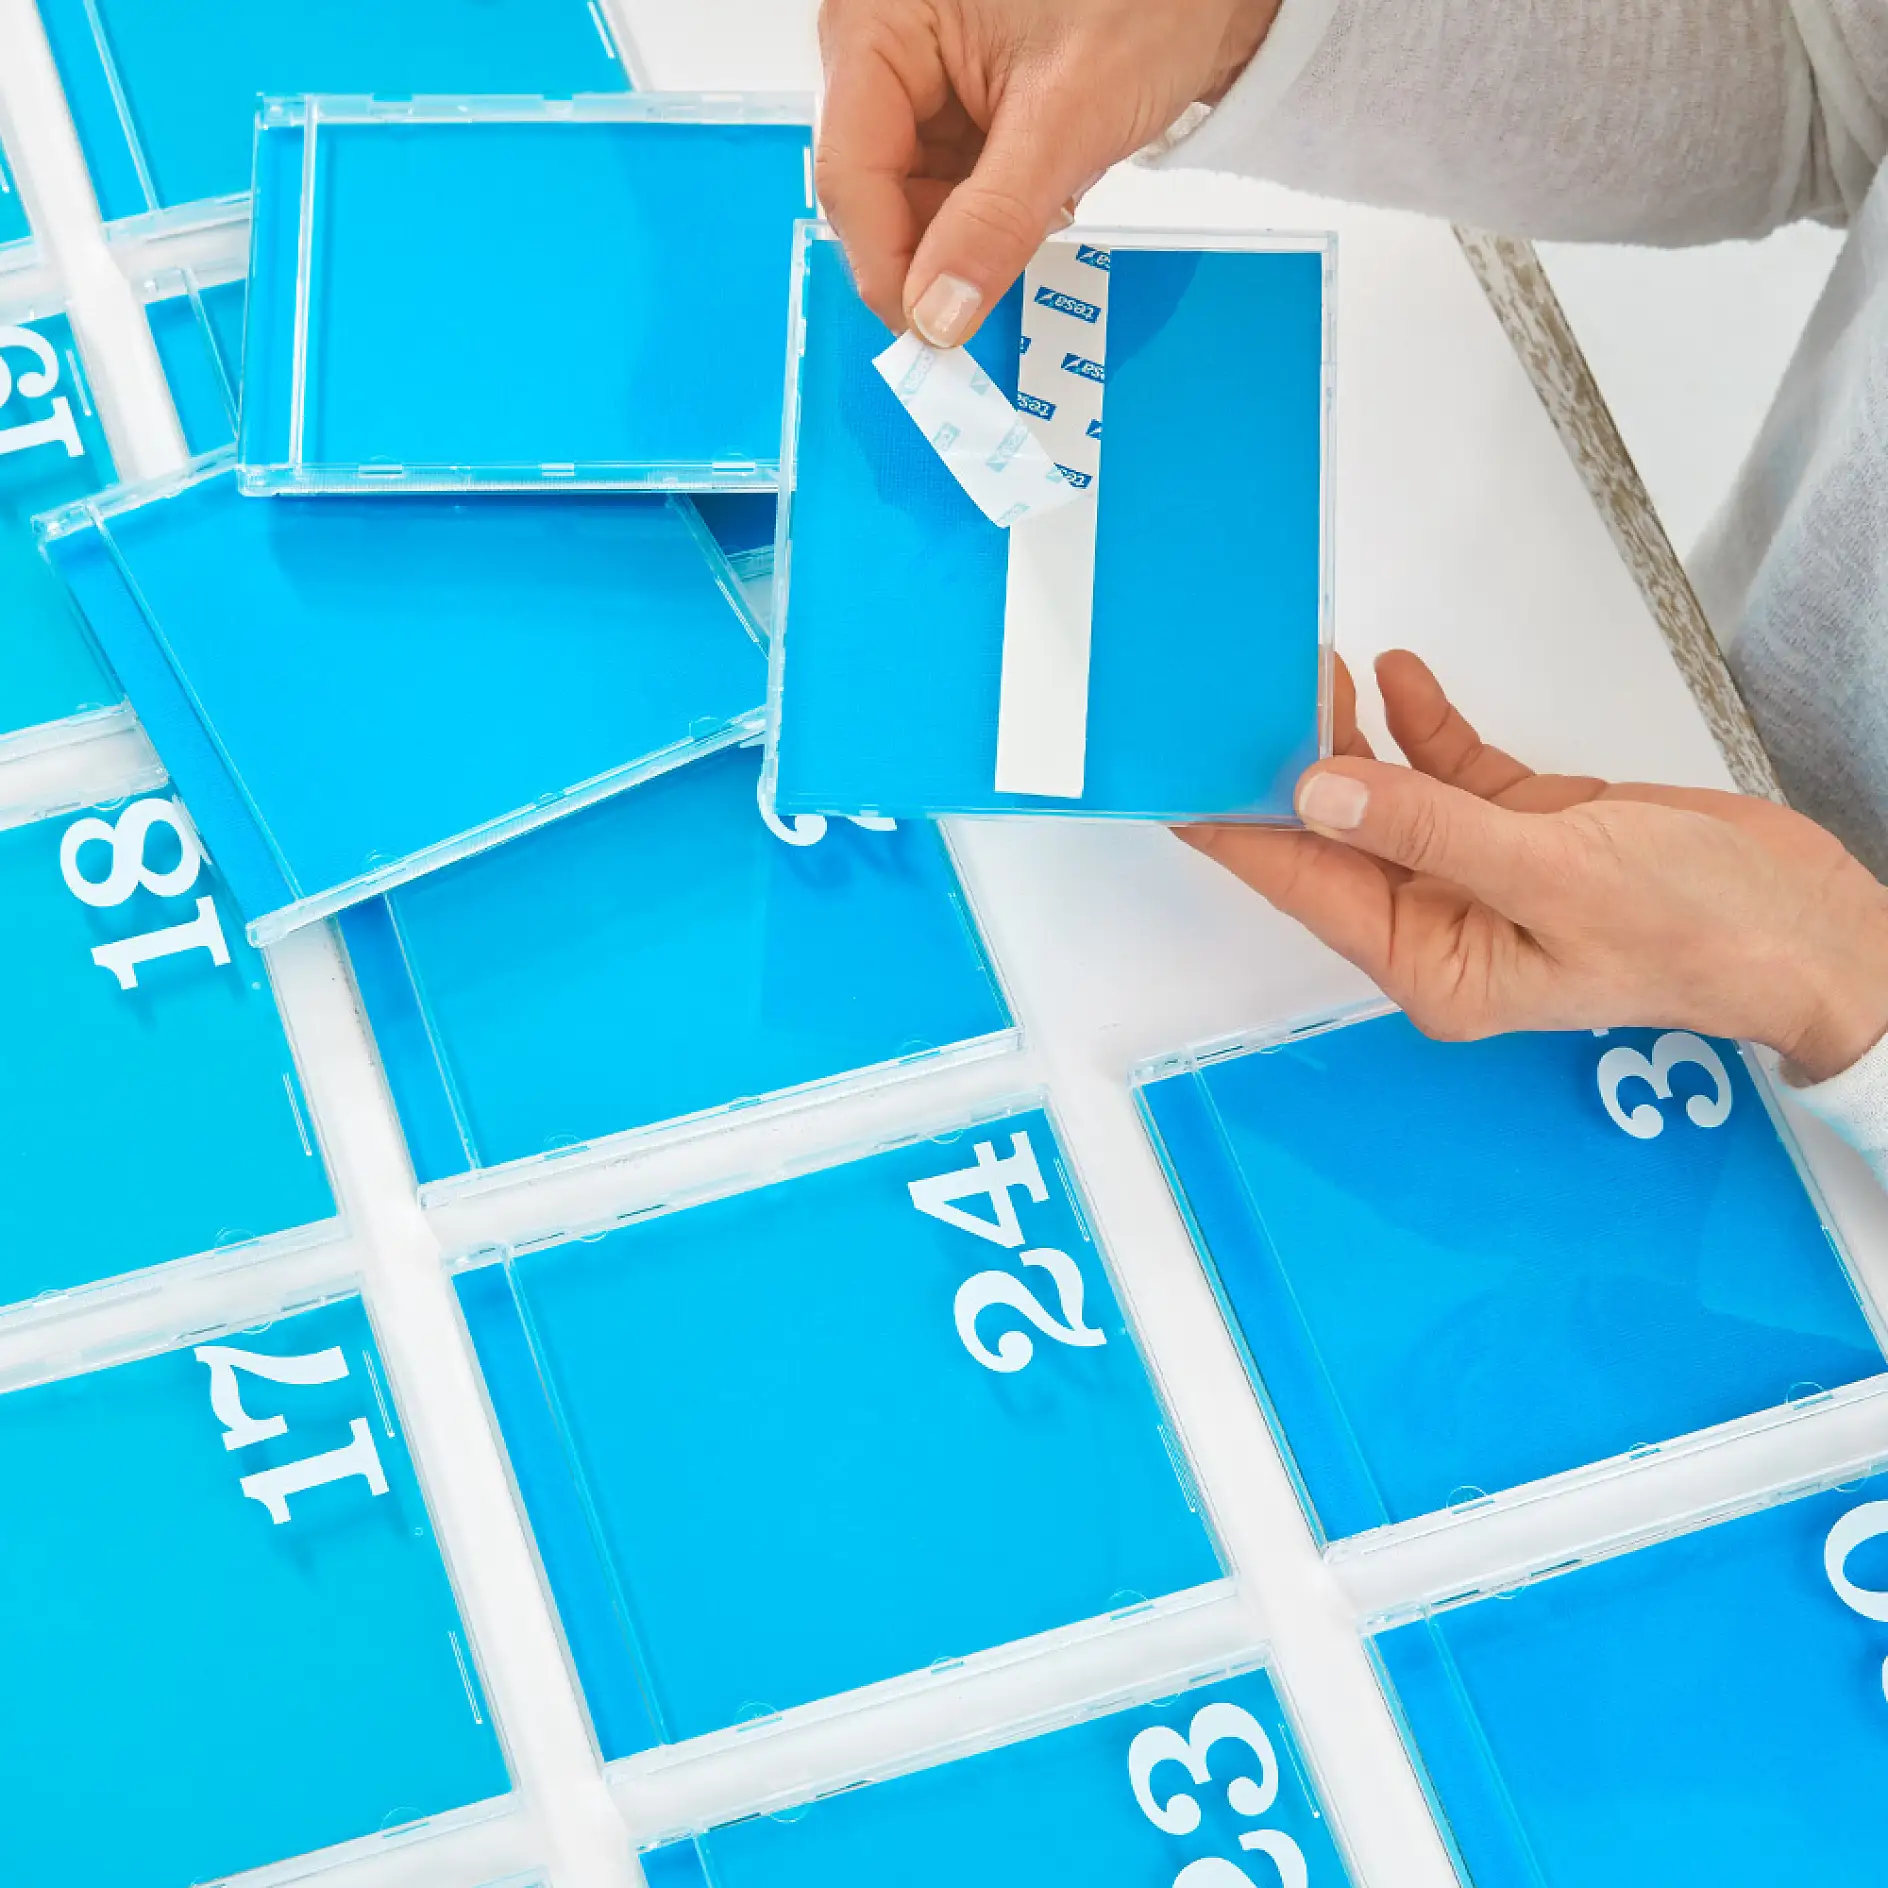 Making a DIY calendar – removing the backing from mounting tape for tiles & metal